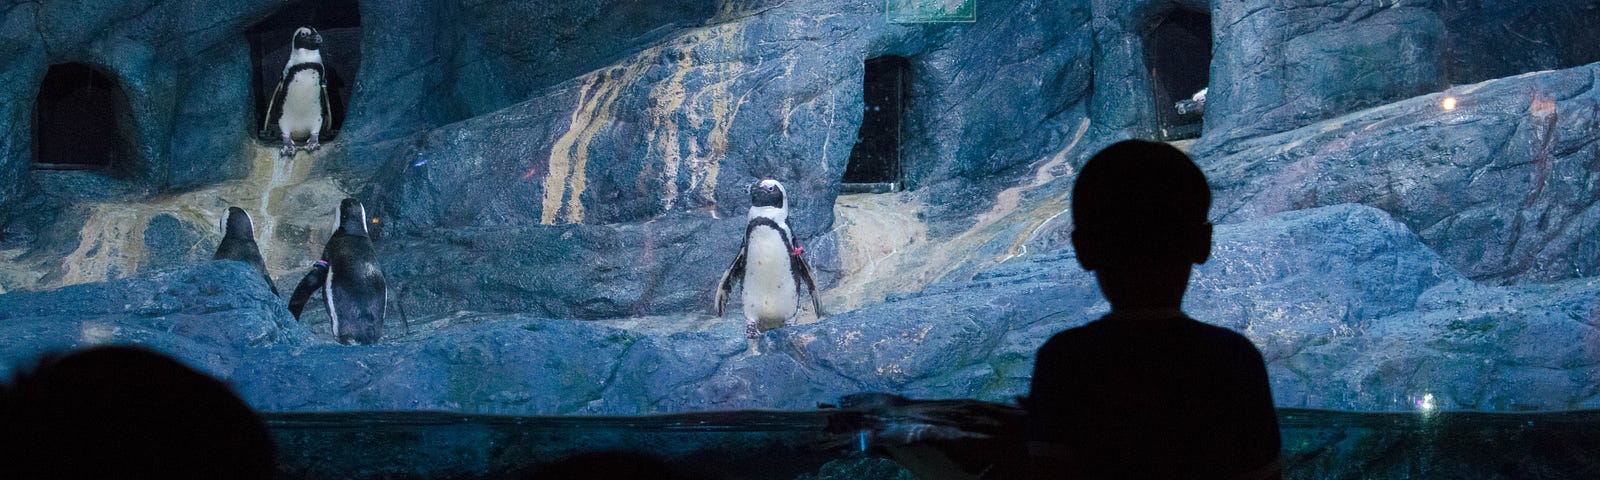 A boy watches penguins in an enclosure. The boy stands with his back to the camera. He and the other zoo visitors are in shadow.